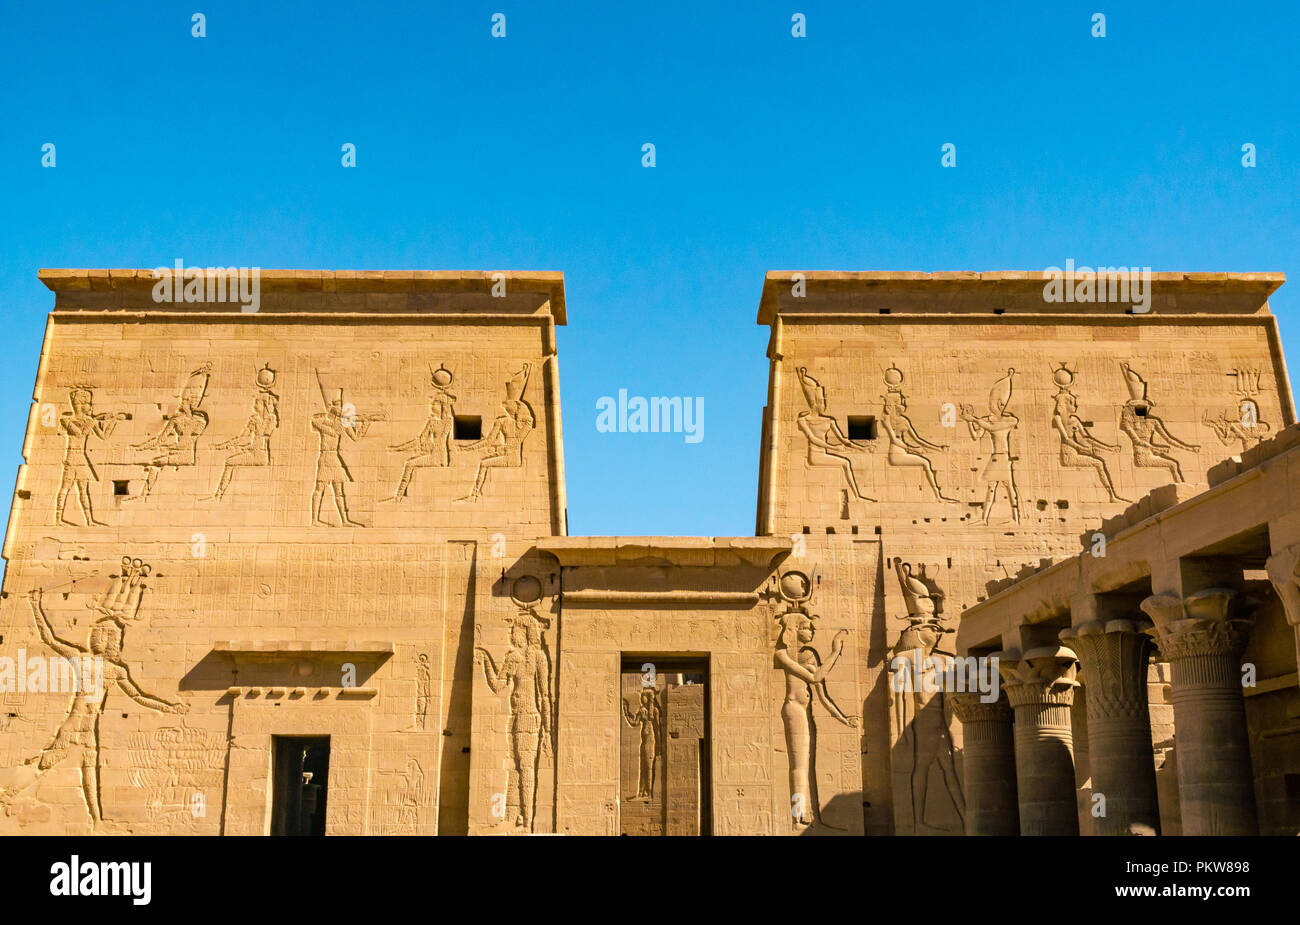 Outer pylon walls with carved Egyptian figures and hieroglyphs, Temple of Philae, Agilkia Island, River Nile, Aswan, Egypt, Africa Stock Photo